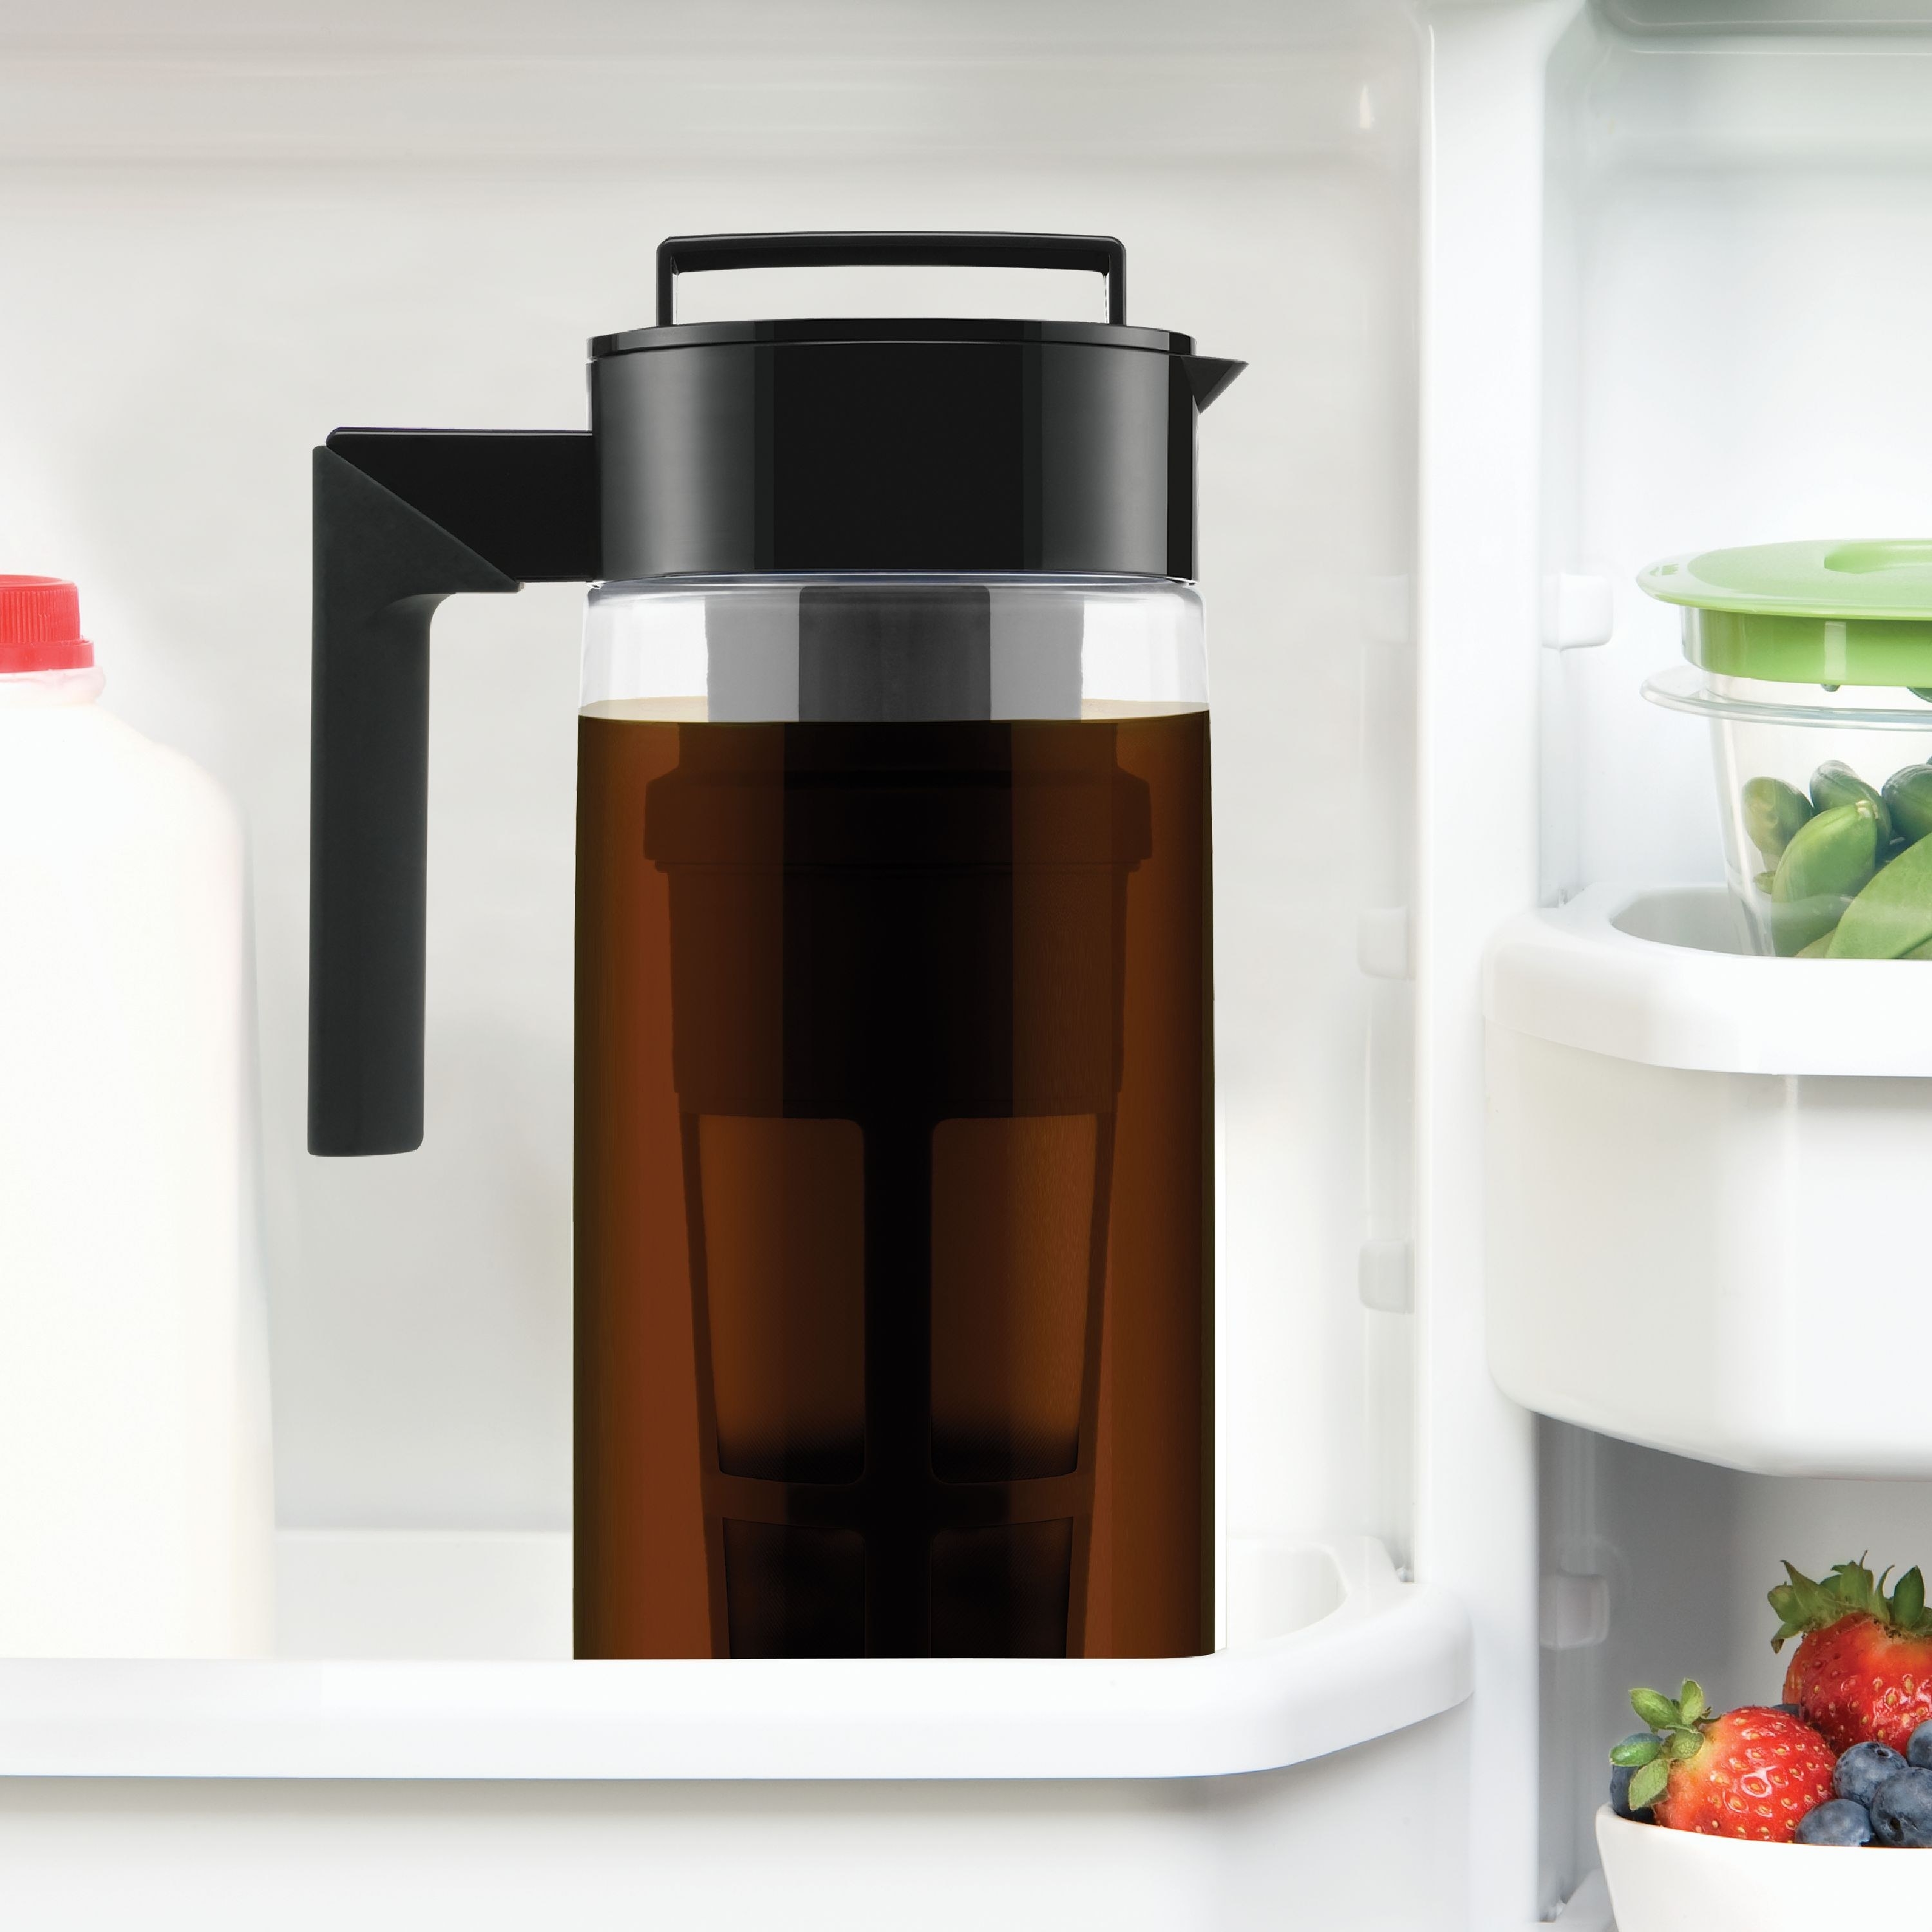 The black and clear cold brew coffee maker filled with coffee on a refrigerator door